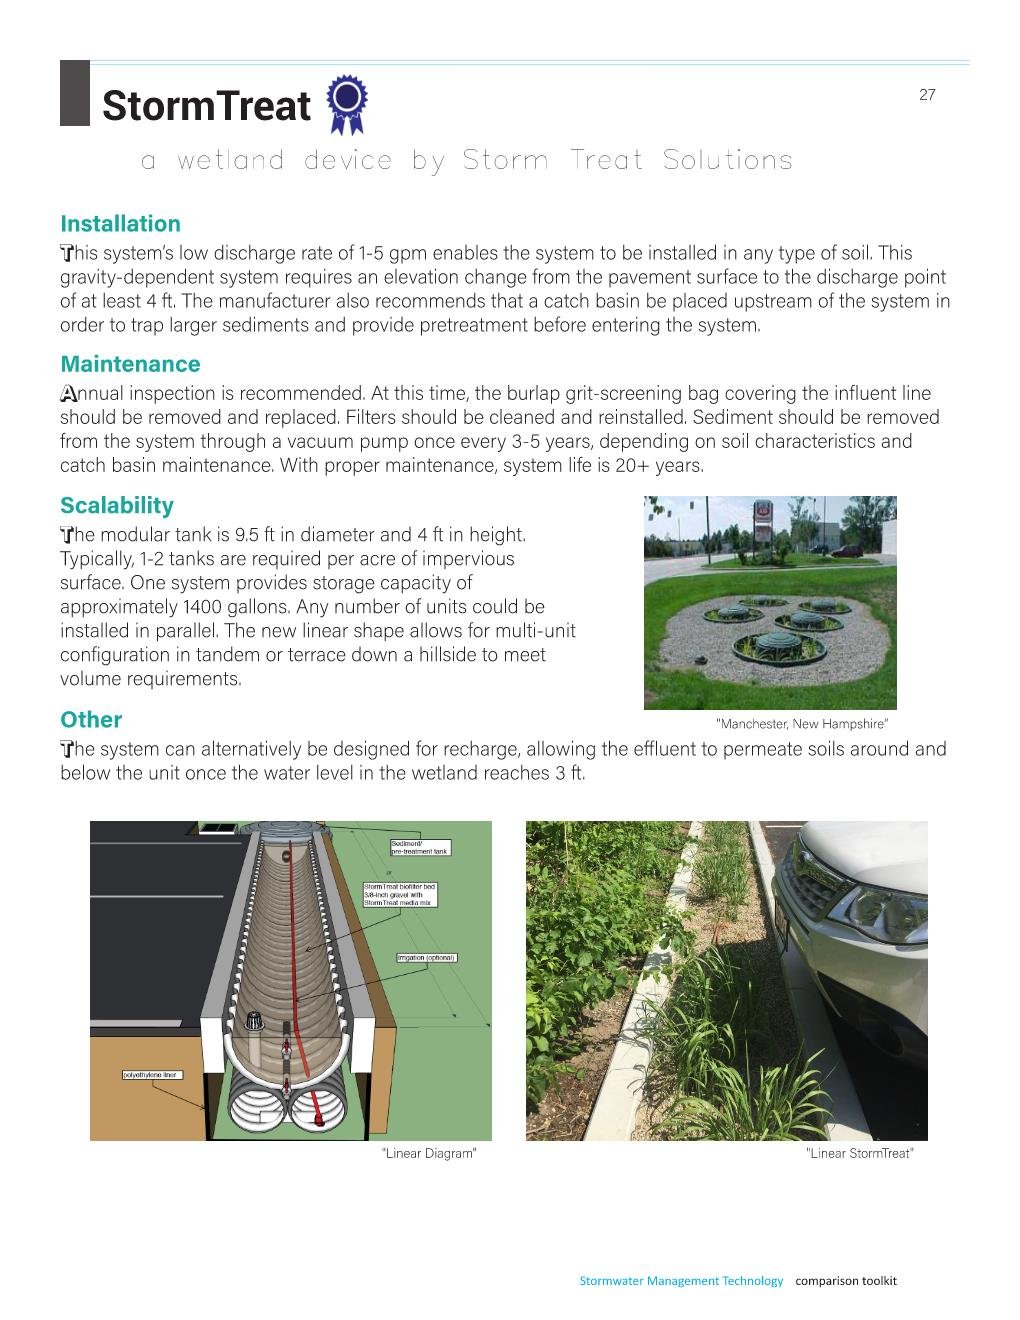 Stormwater Management Technology Comparison Toolkit Page 027.jpg